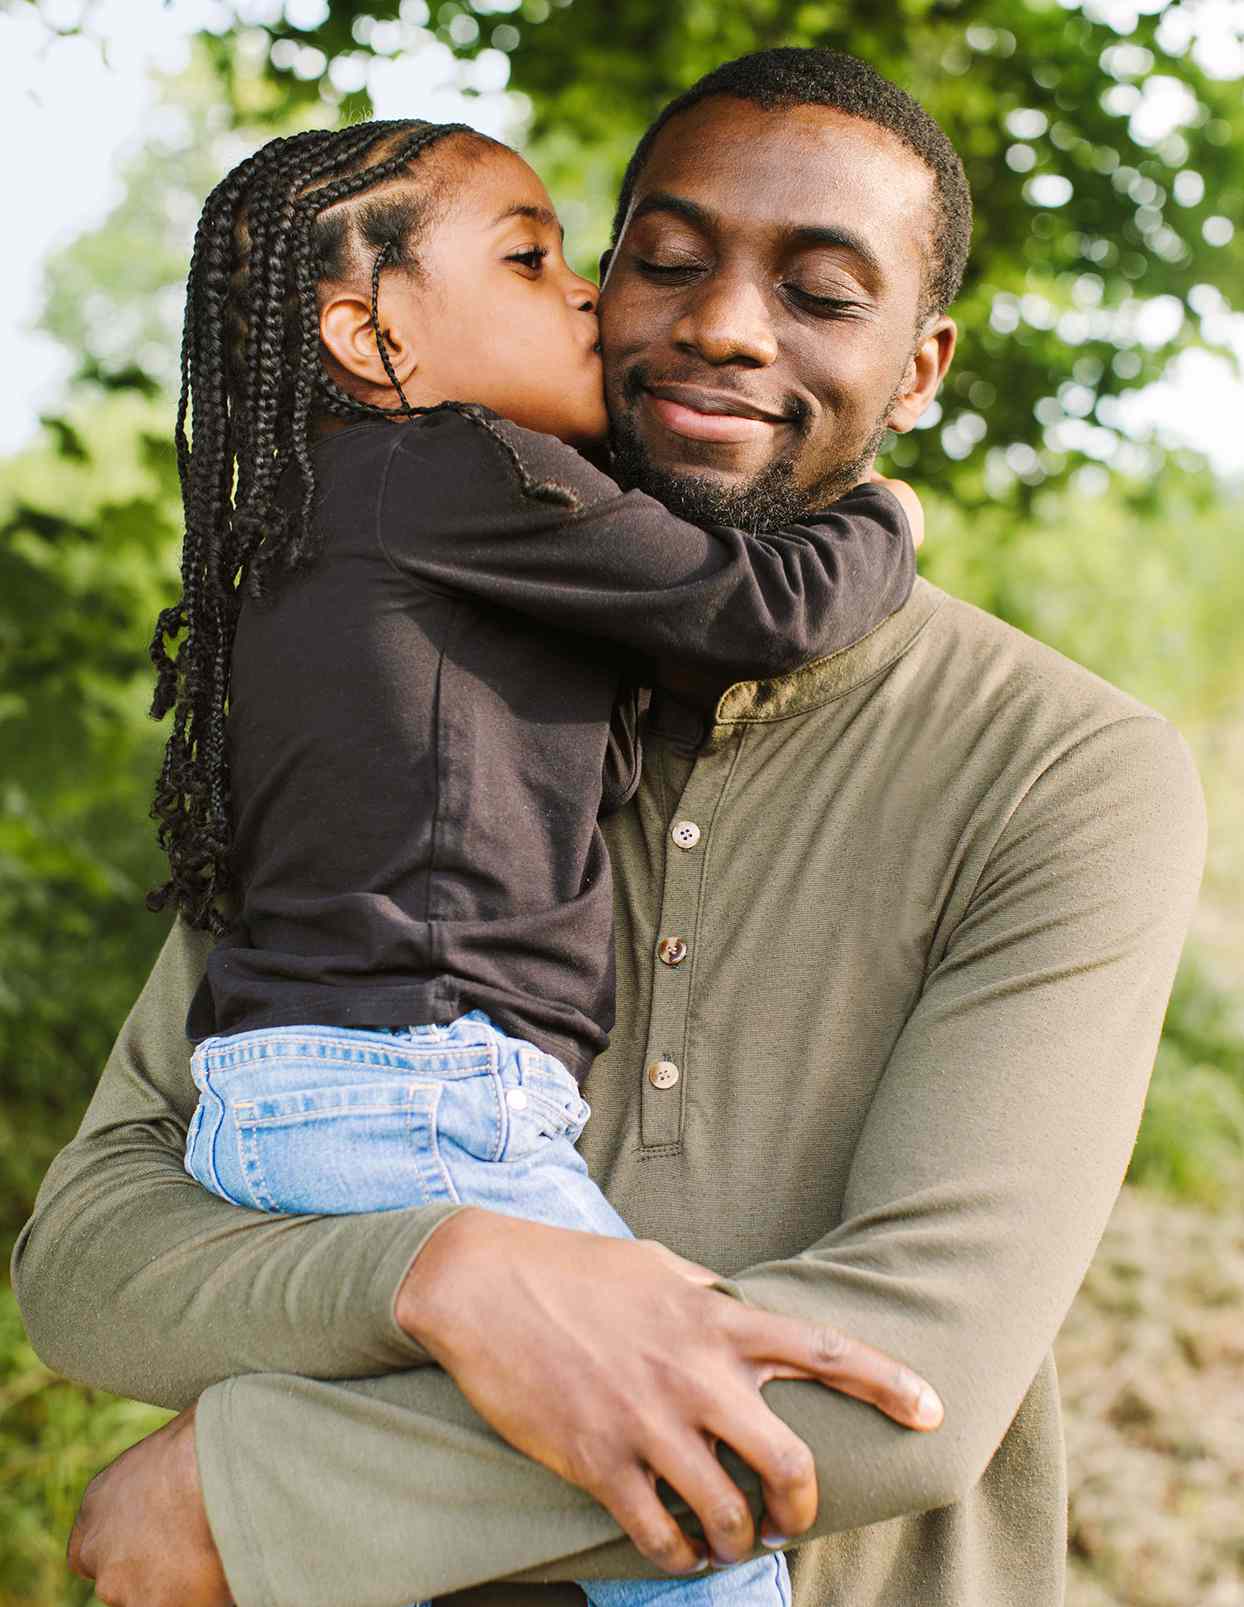 young son in his smiling father's arms outside kissing his cheek